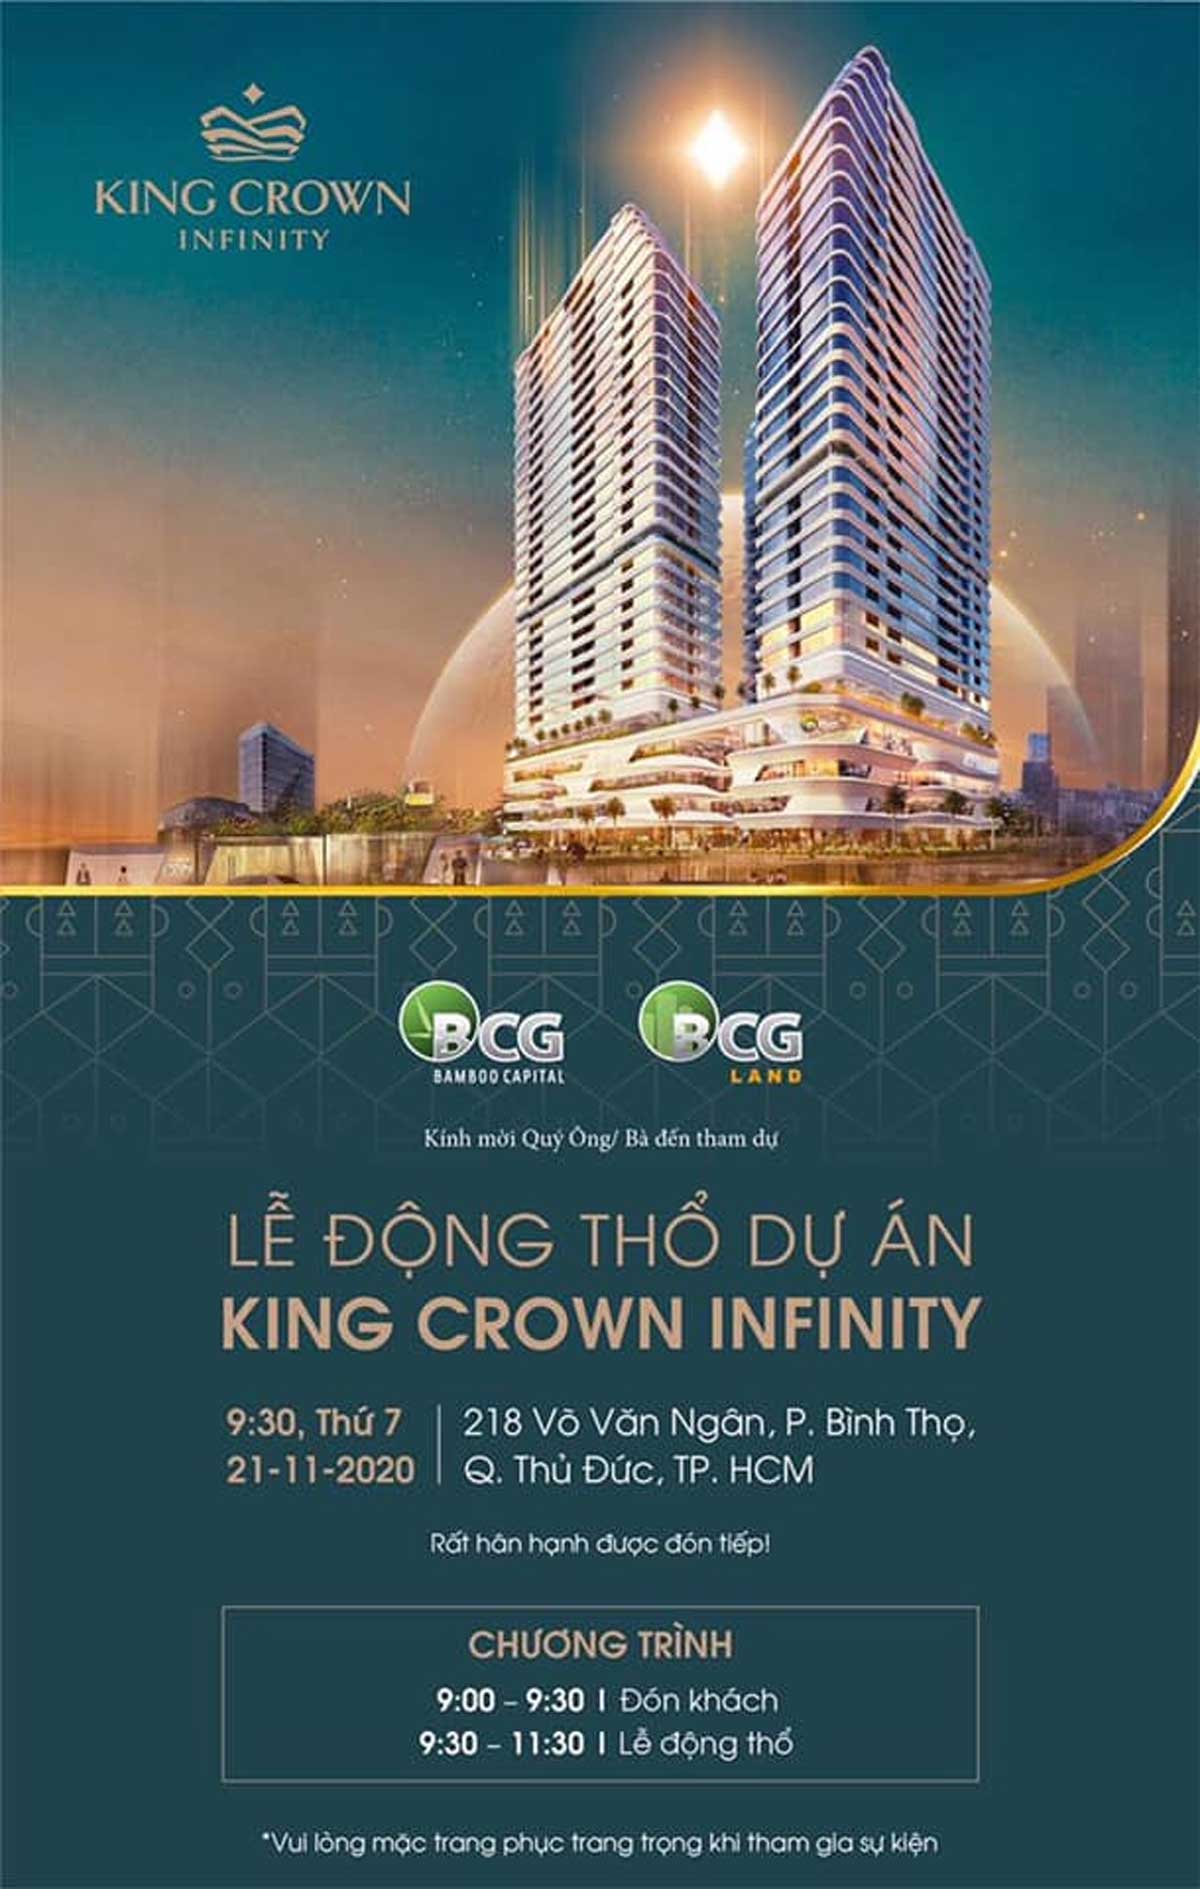 le dong tho du an king crown infinity thu duc - KING CROWN INFINITY